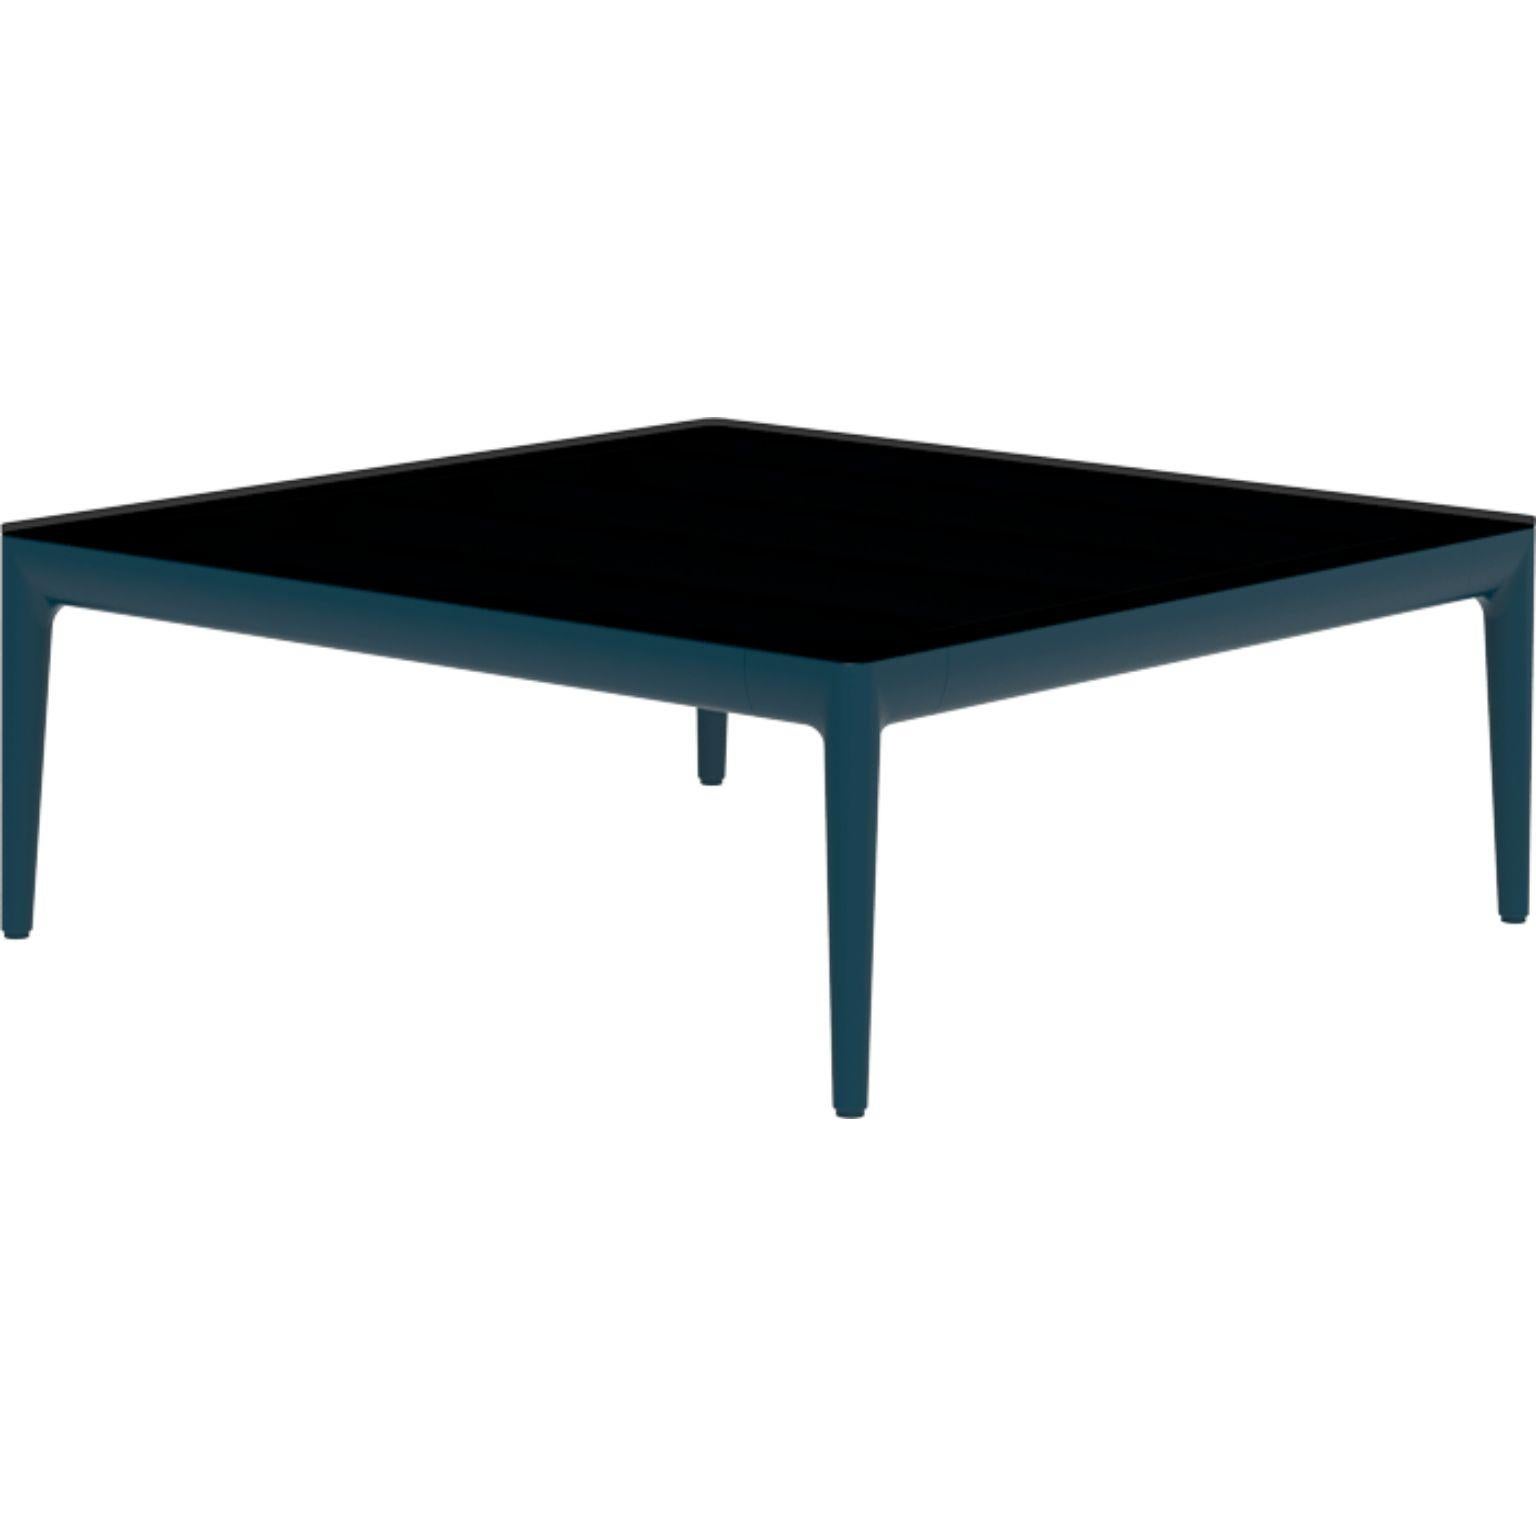 Ribbons navy 76 coffee table by MOWEE
Dimensions: D76 x W76 x H29 cm
Material: Aluminum and HPL top.
Weight: 12 kg.
Also available in different colors and finishes. (HPL Black Edge or Neolith top).

An unmistakable collection for its beauty